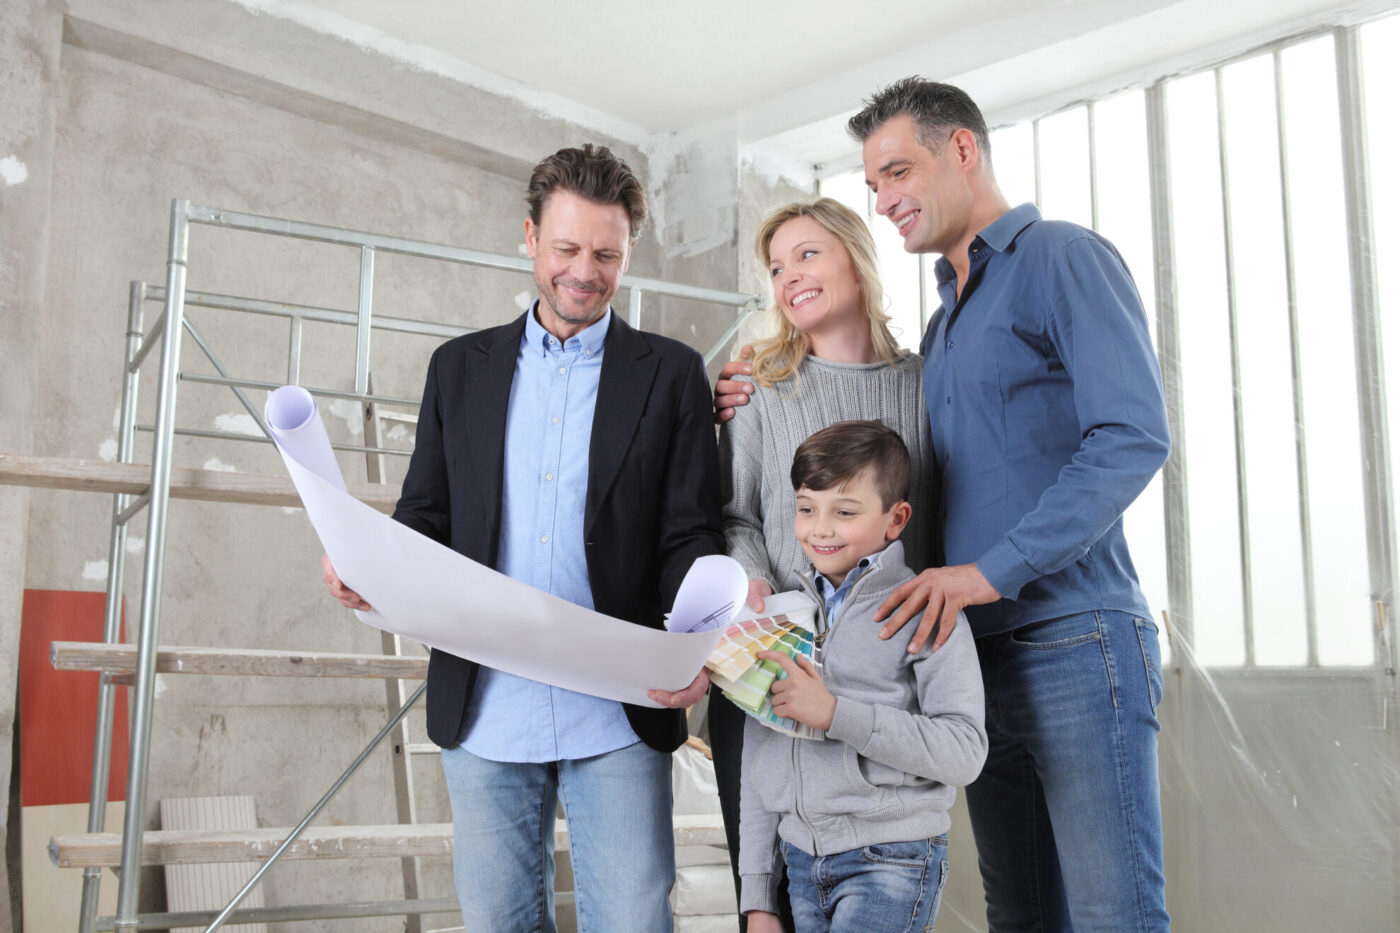 Architect showing house design plans to a family with child. meeting at interior construction site to talk about house appearance, interior decoration, home layout and wall colors